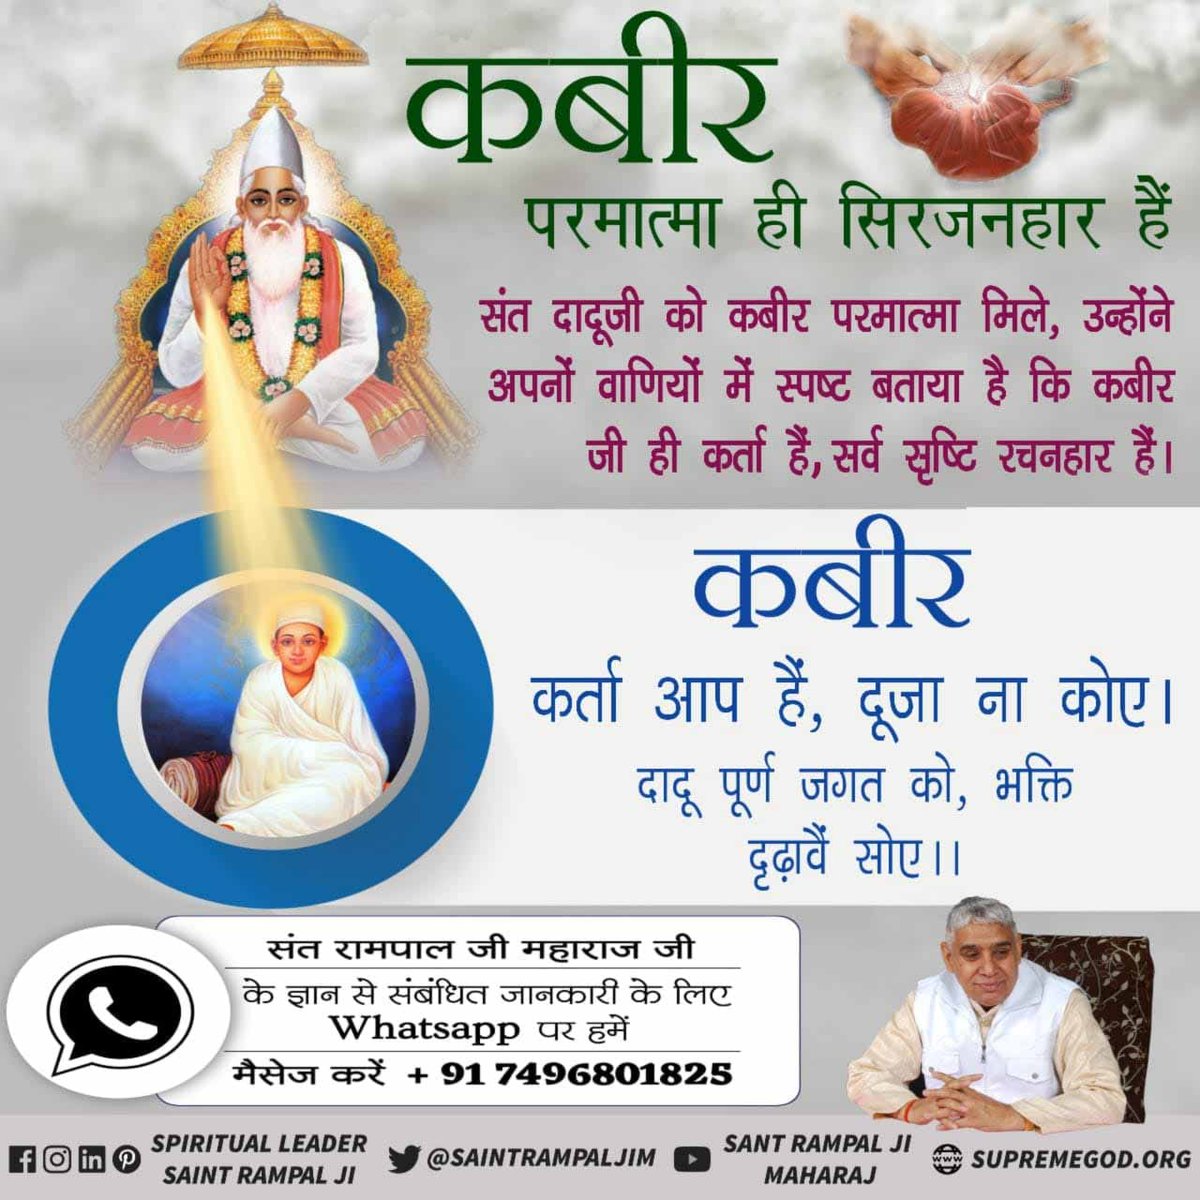 #अविनाशी_परमात्मा_कबीर 
Almighty God is Kabir Saheb. There is proof in the Vedas that God Kabir can remove every problem of his devotee in a moment.
🌹🌹🌹🙏🙏
Sant Rampal Ji Maharaj